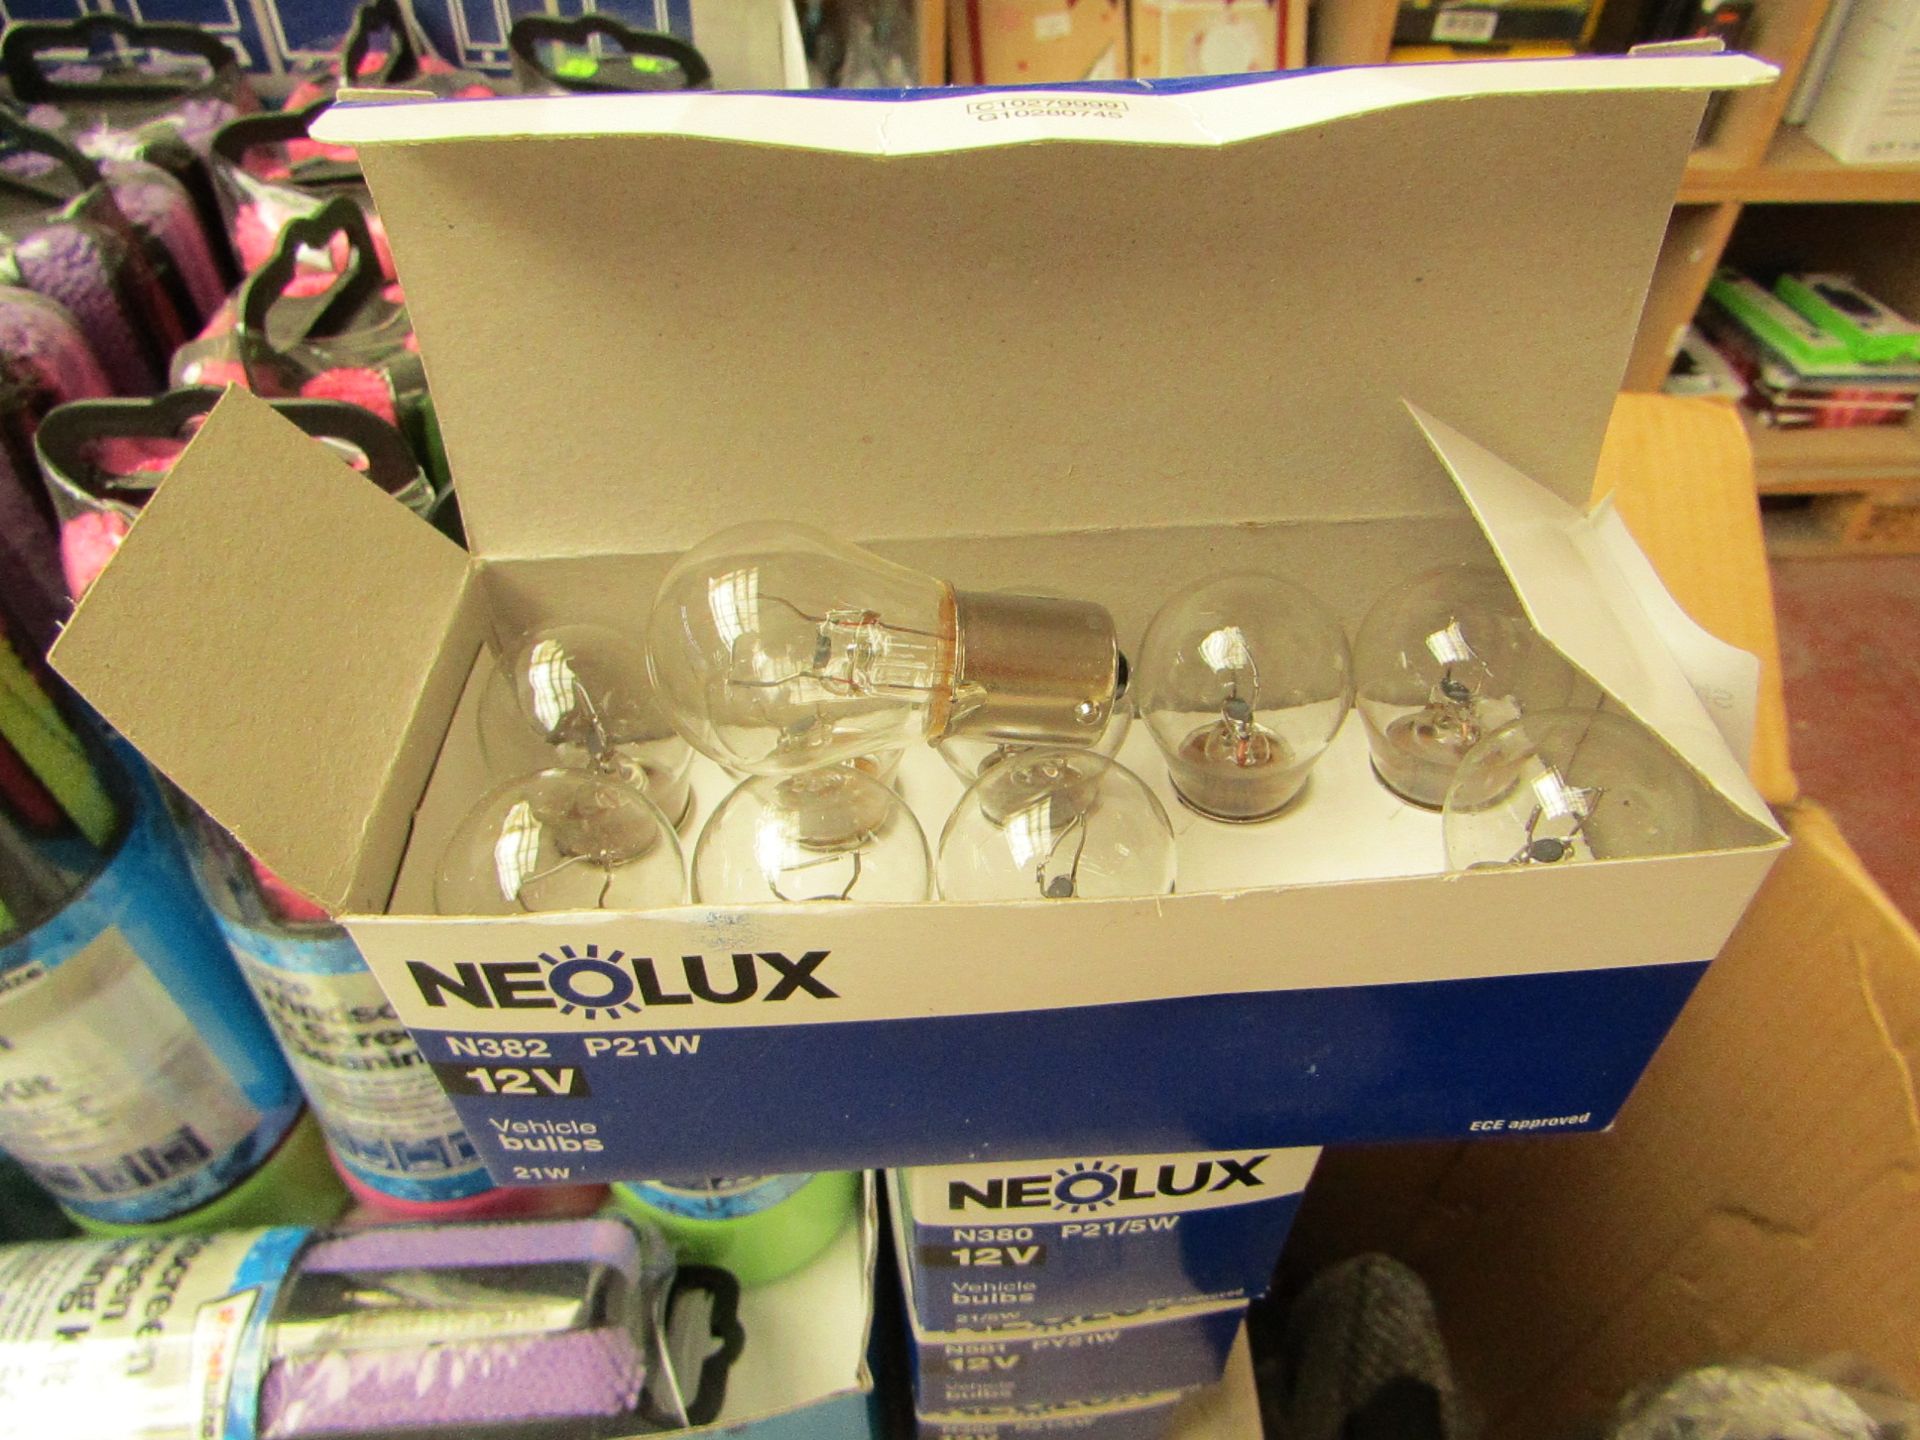 4 Boxes of 10 Neolux P21w N382 12 v car Bulbs.new and Boxed